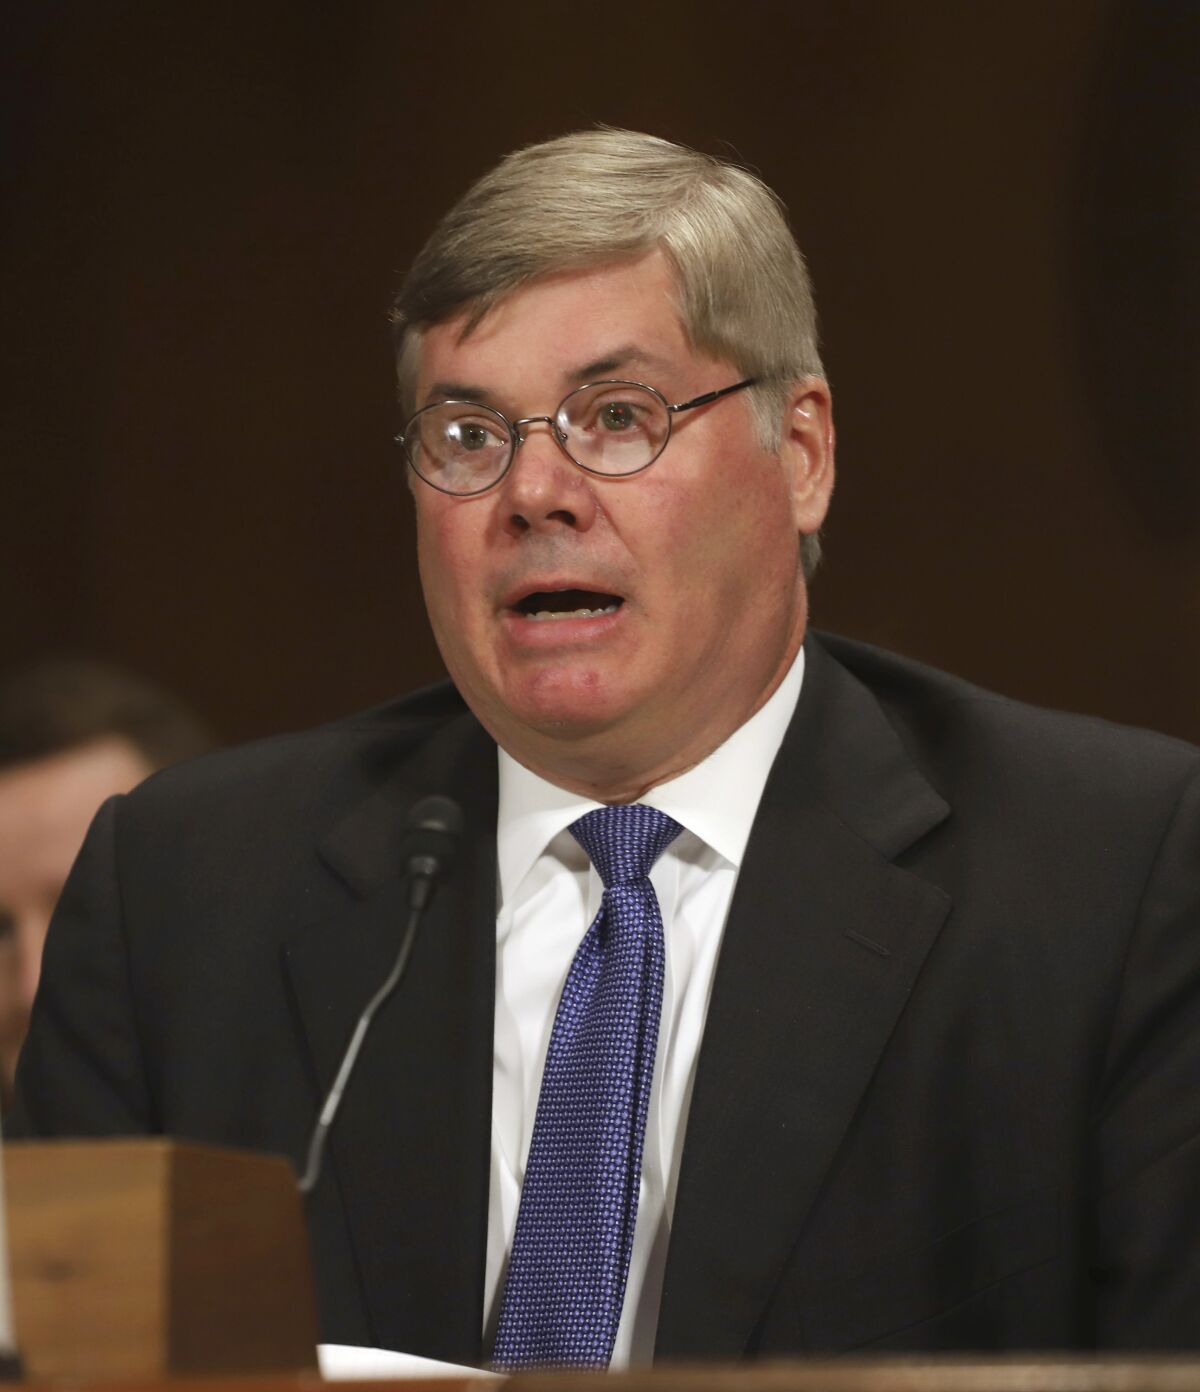 FILE -Robert R. Summerhays, President Donald Trump's nominee for District Judge for the Western District of Louisiana gives testimony during a U. S. Senate Judiciary Committee Hearing on Capitol Hill in Washington on Wednesday, April 11, 2018. Robert R. Summerhays, a federal judge hears arguments Friday, May 13, 2022 on whether the Biden administration can lift pandemic-related restrictions on immigrants requesting asylum later this month.(AP Photo/Harry Hamburg, File)